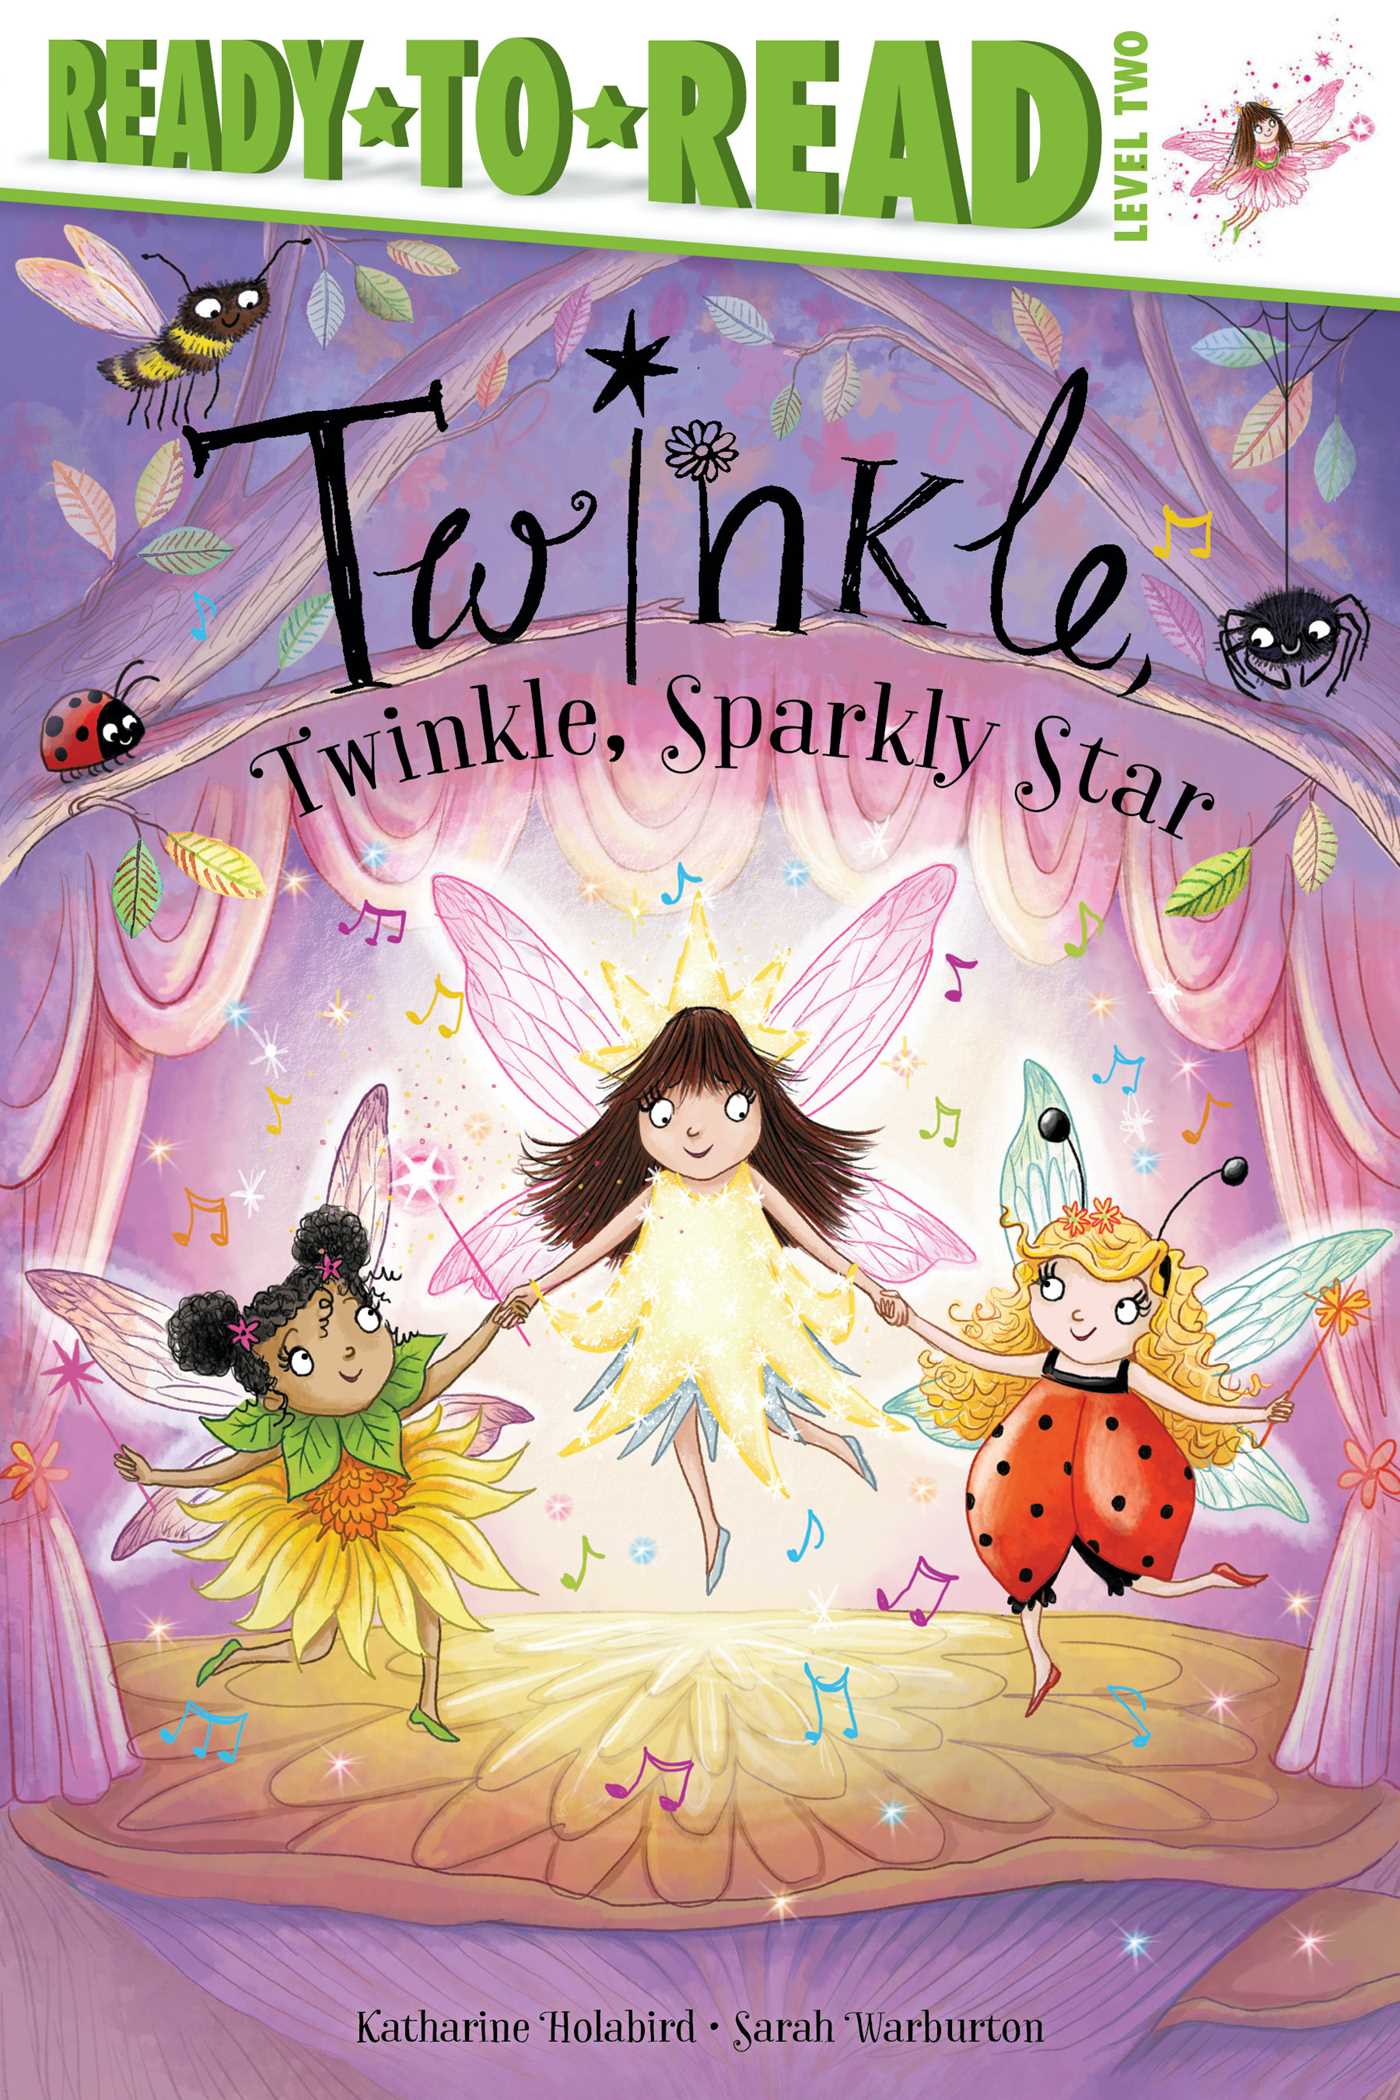 Ready-to-Read - Twinkle, Twinkle, Sparkly Star  | First reader